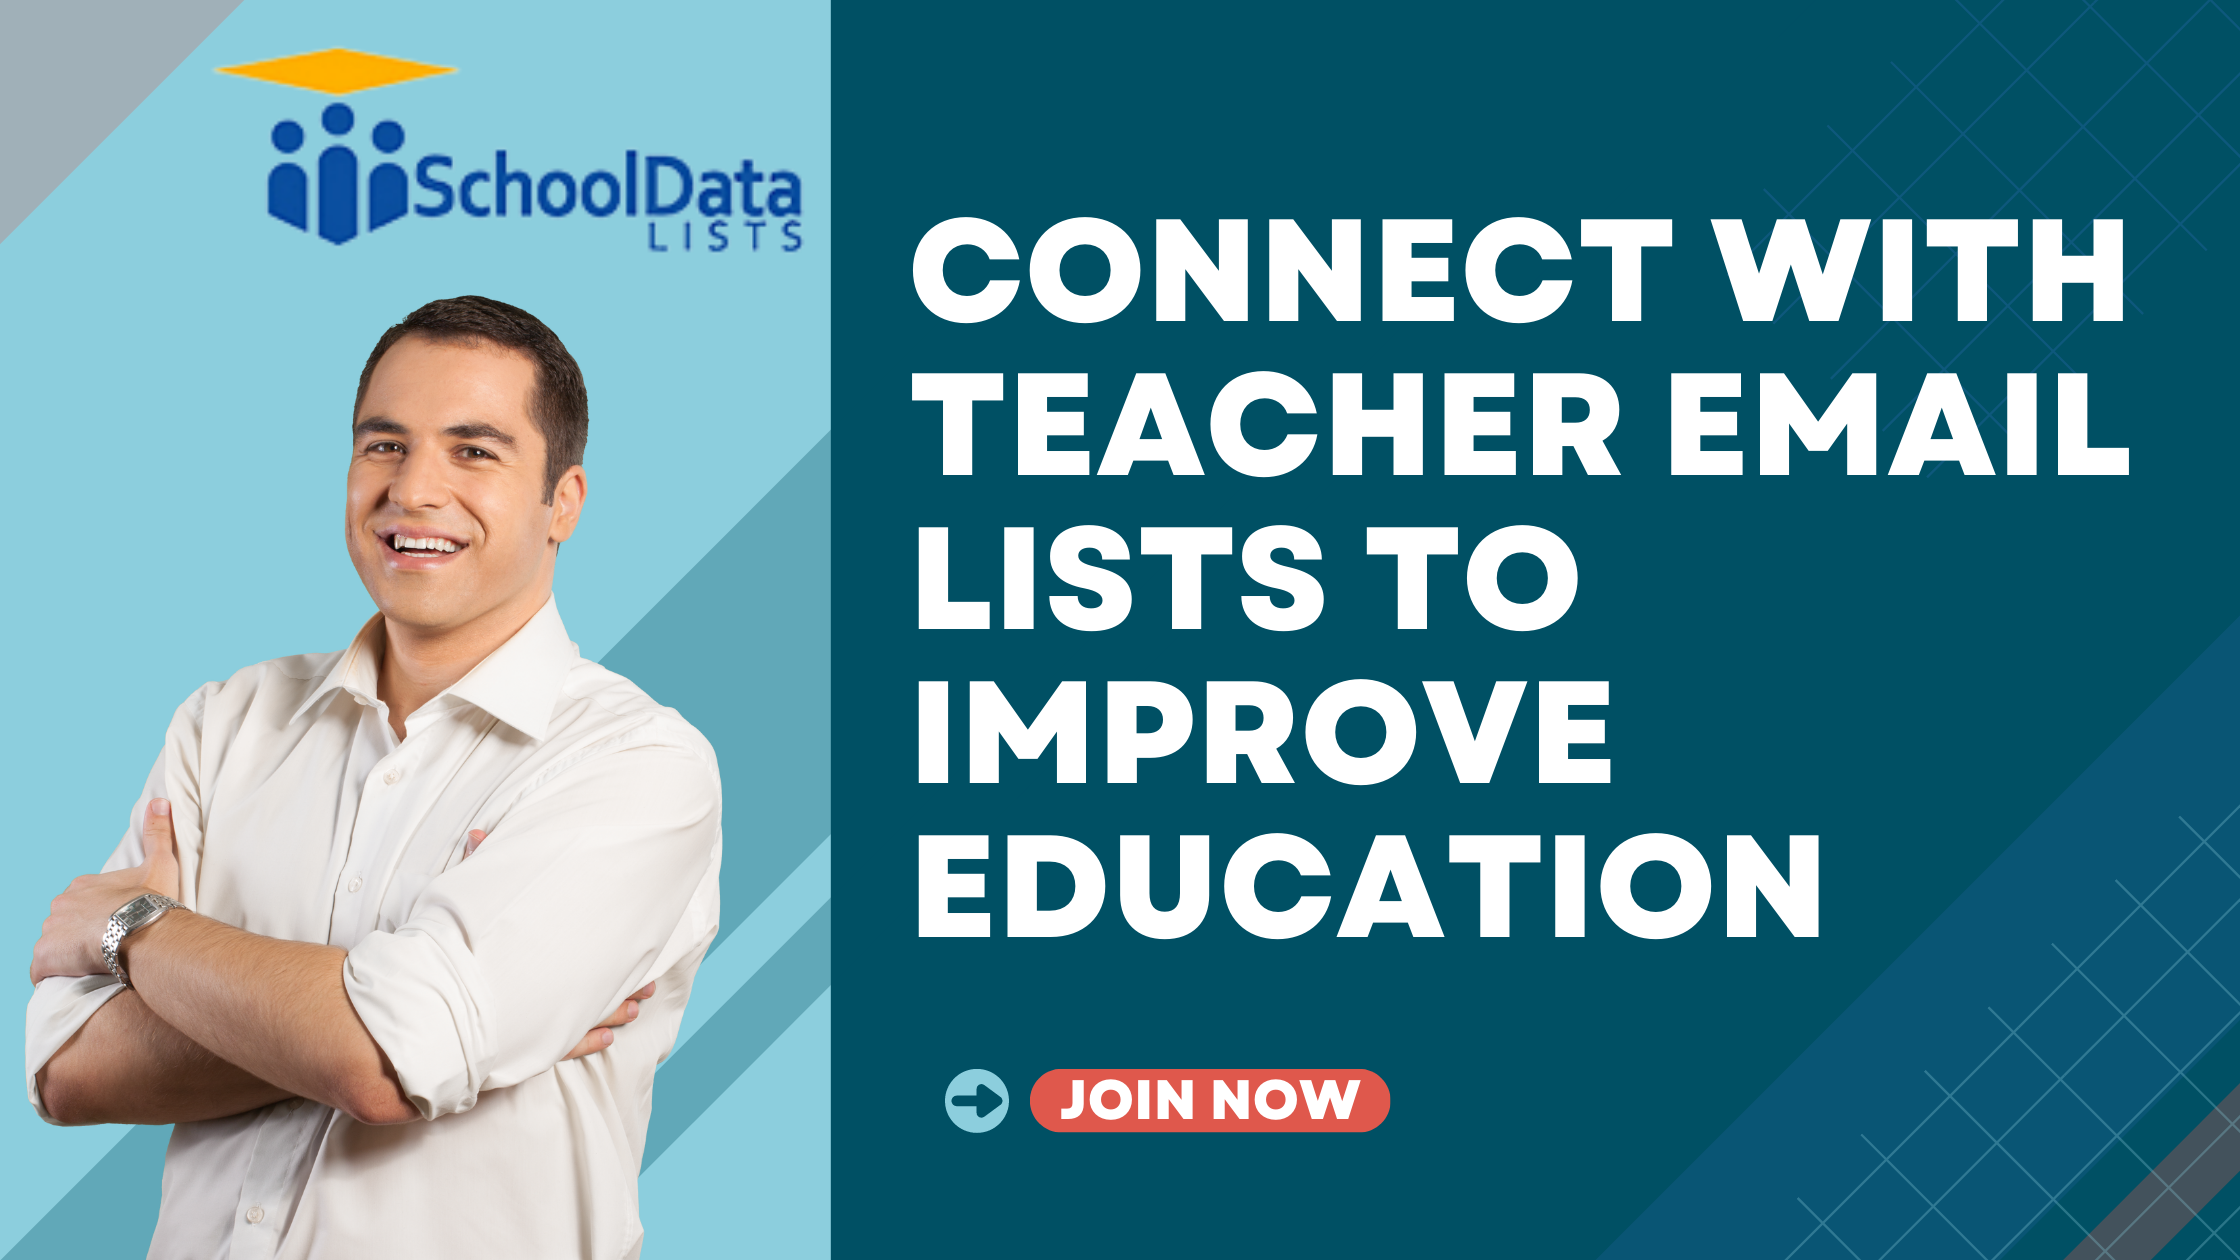 Connect with Teacher Email Lists to Improve Education